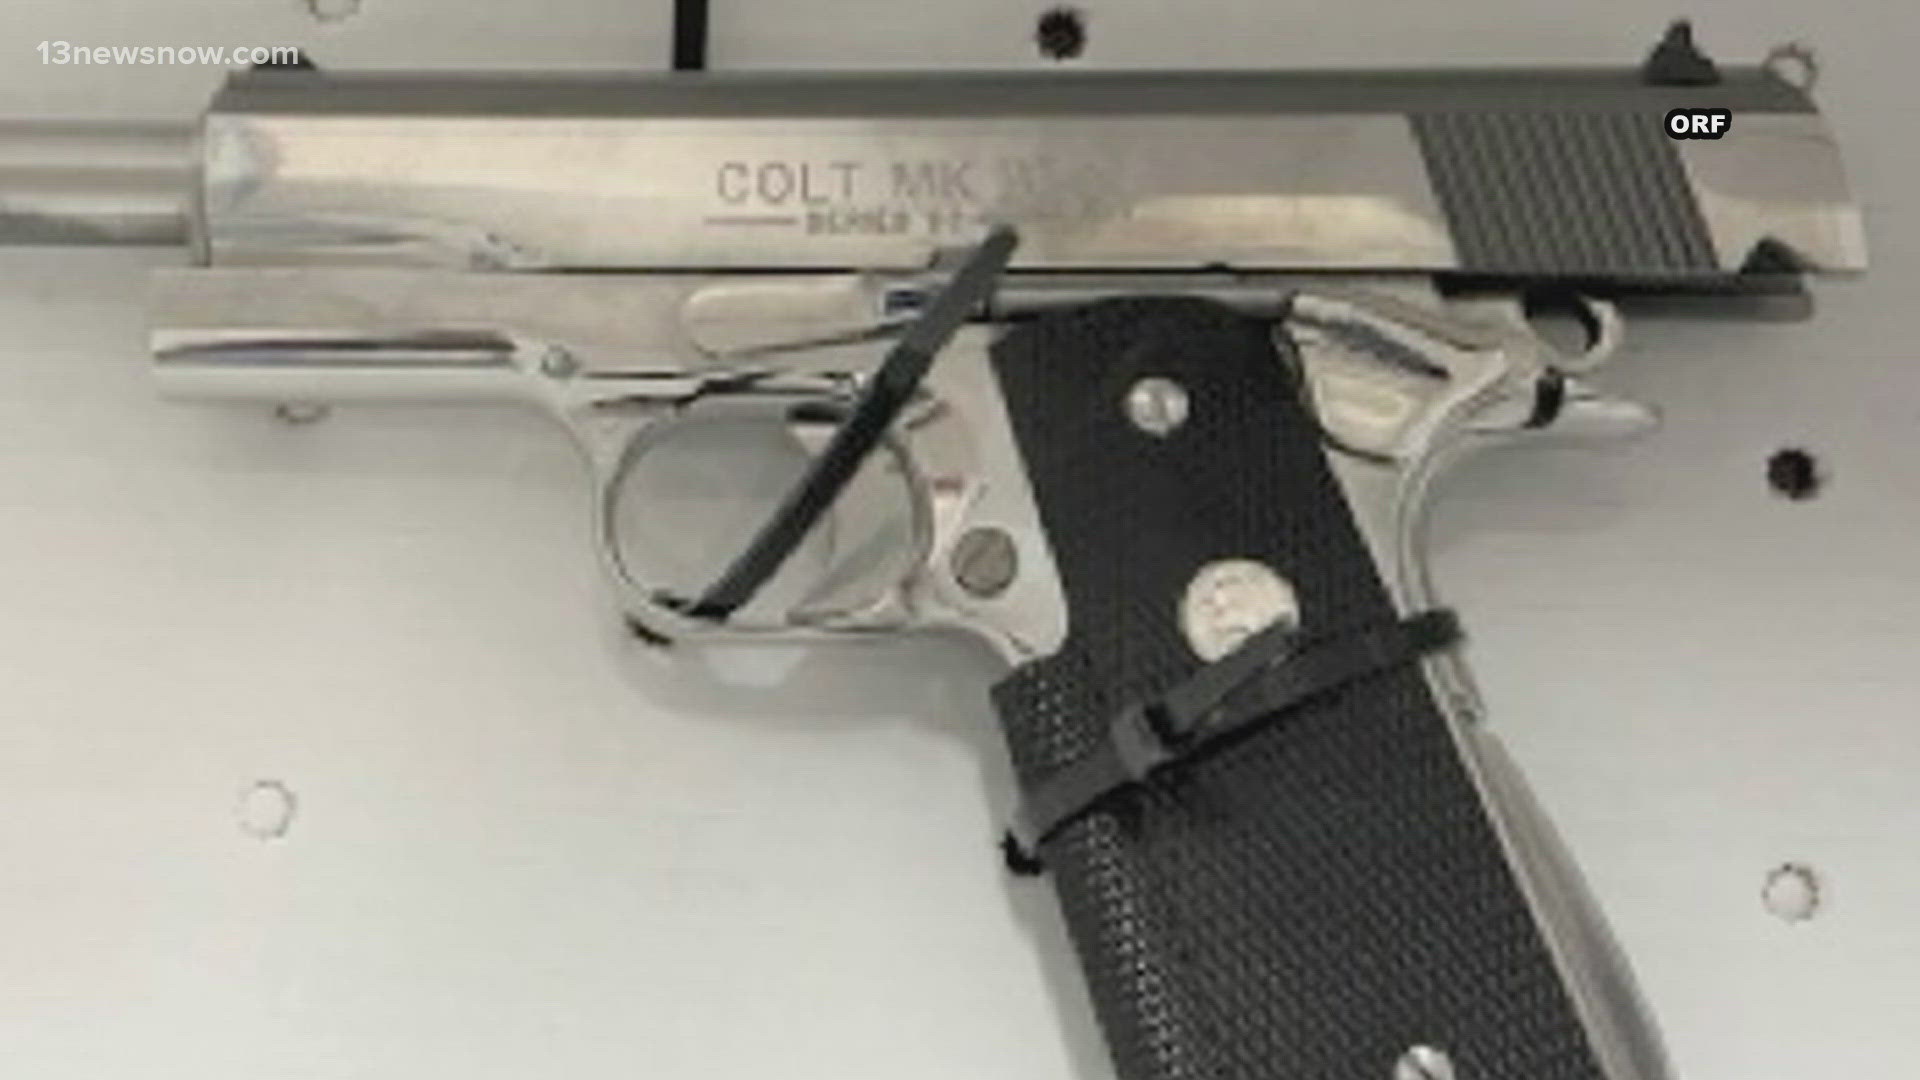 Norfolk police confiscated the firearm and subsequently cited the California man with a weapons charge.